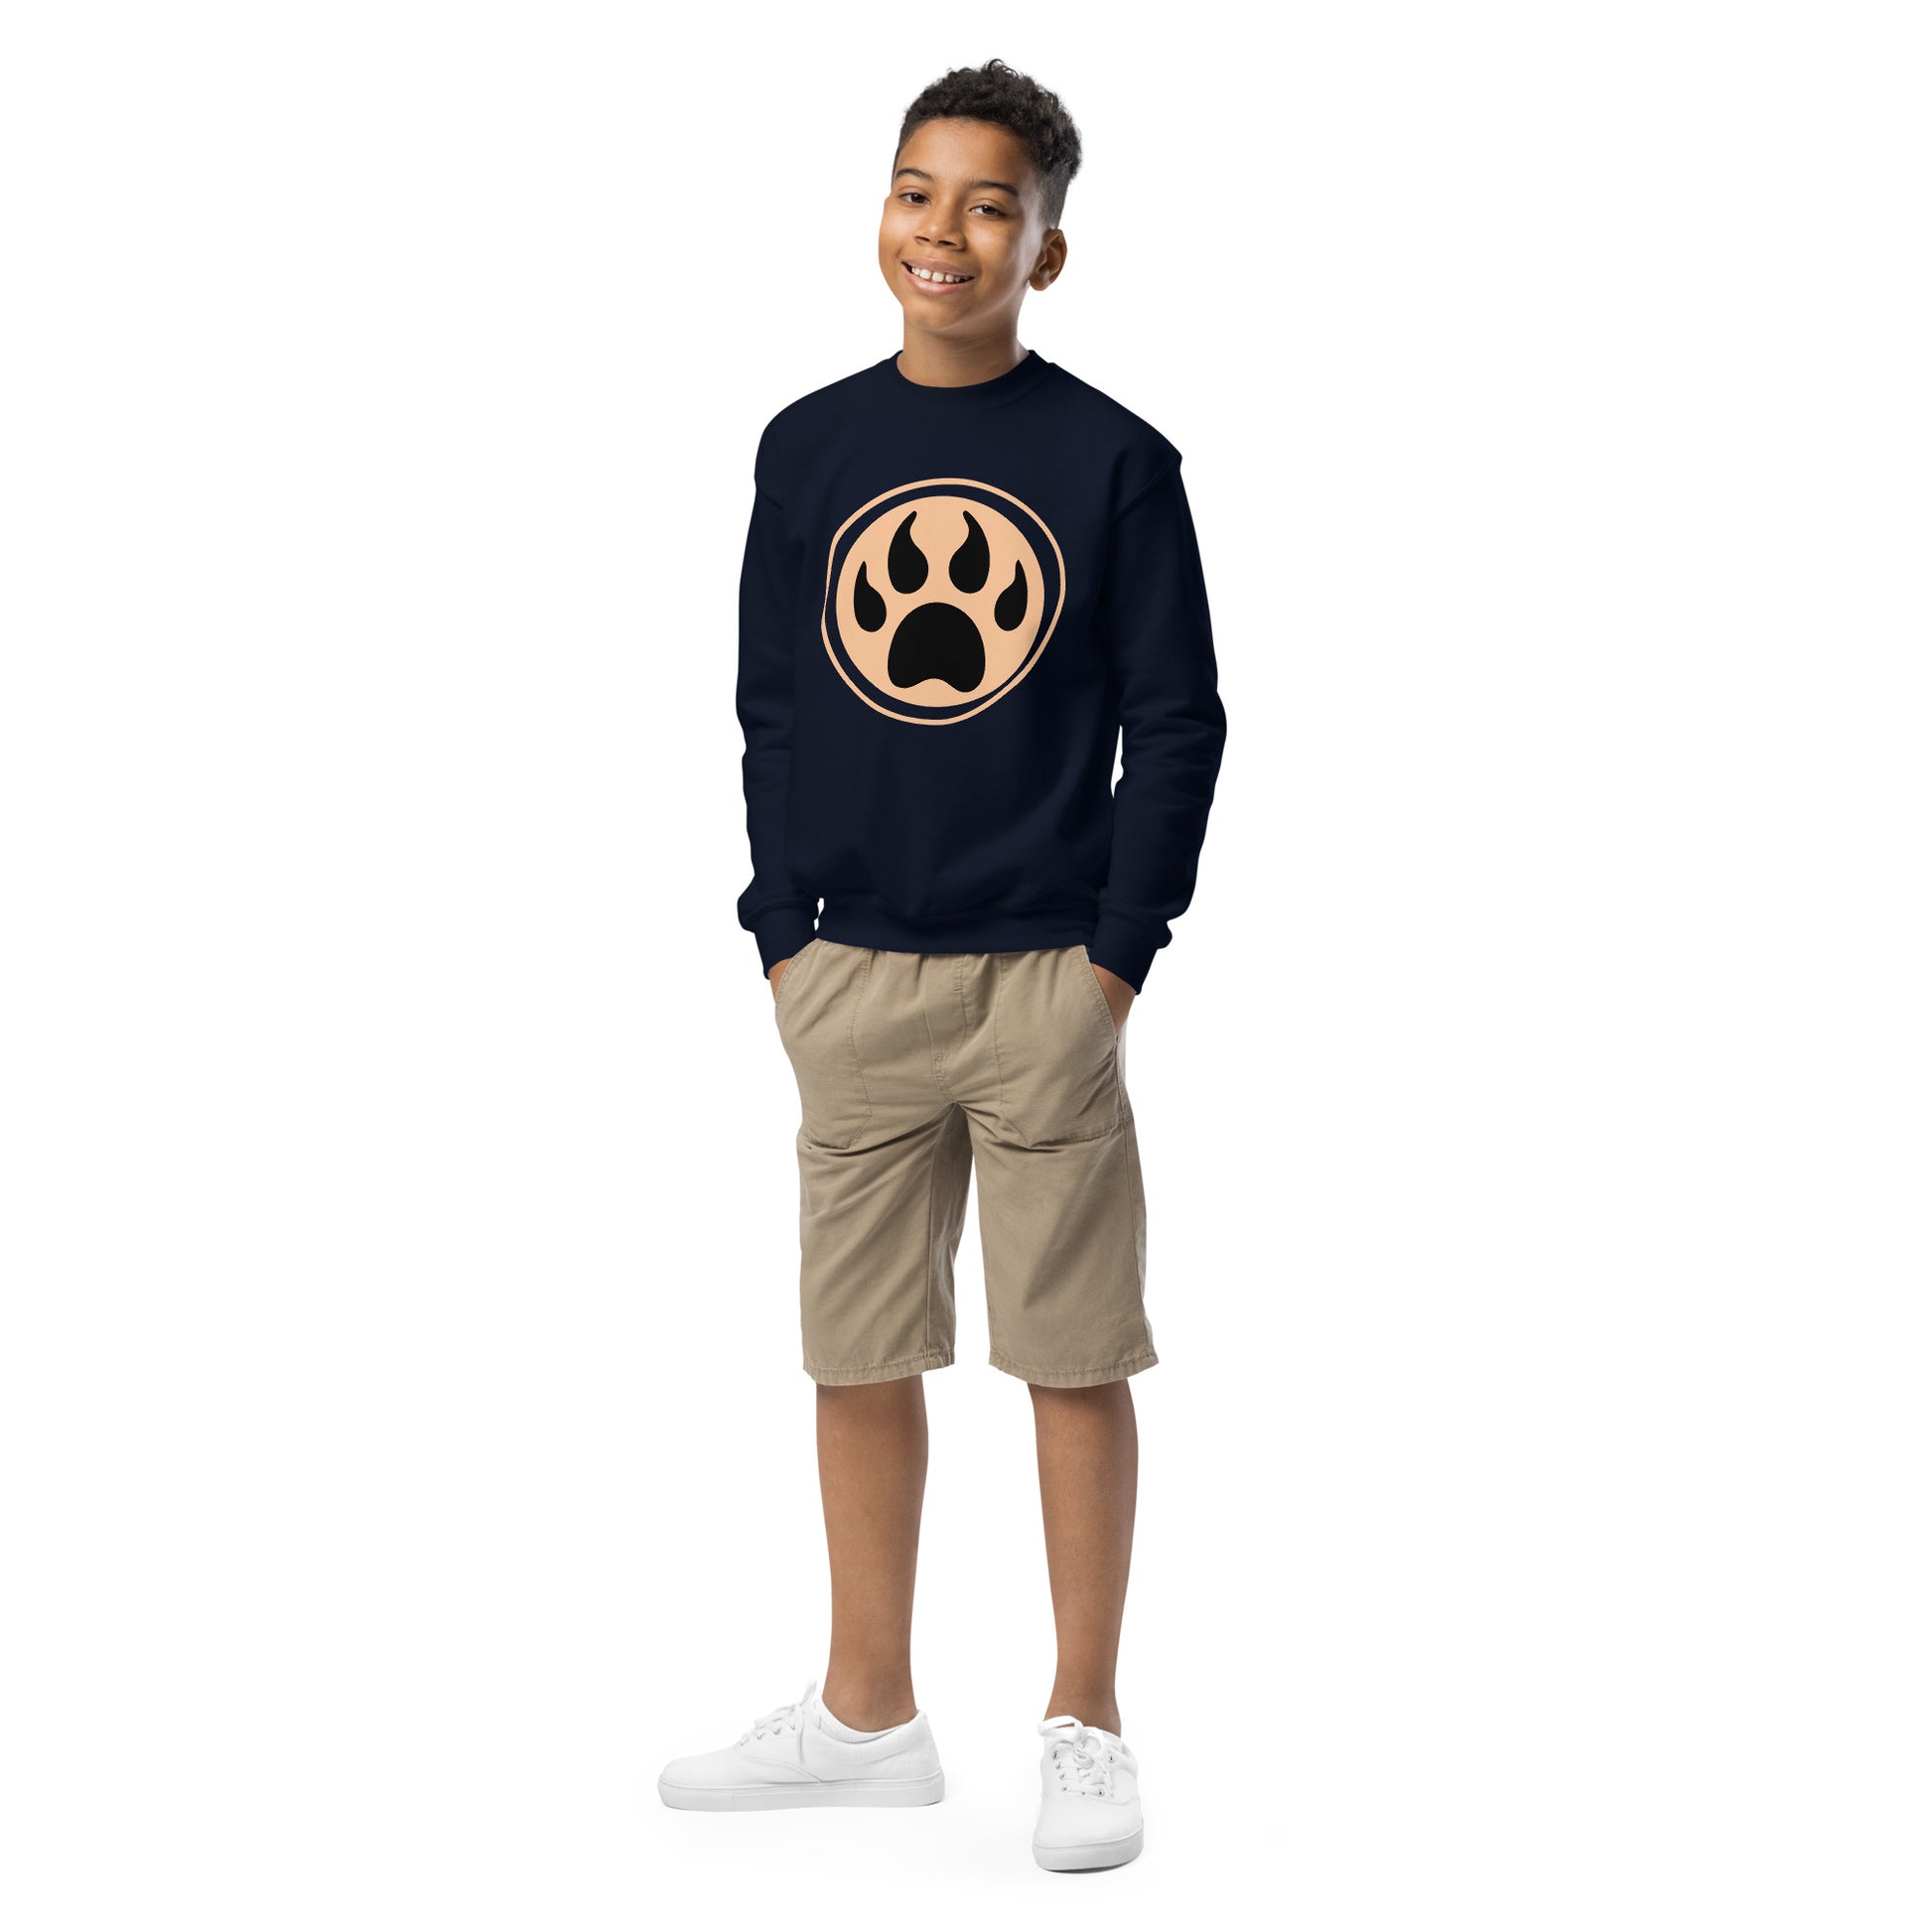 Youth with navy sweatshirt and a print of a wolf claw